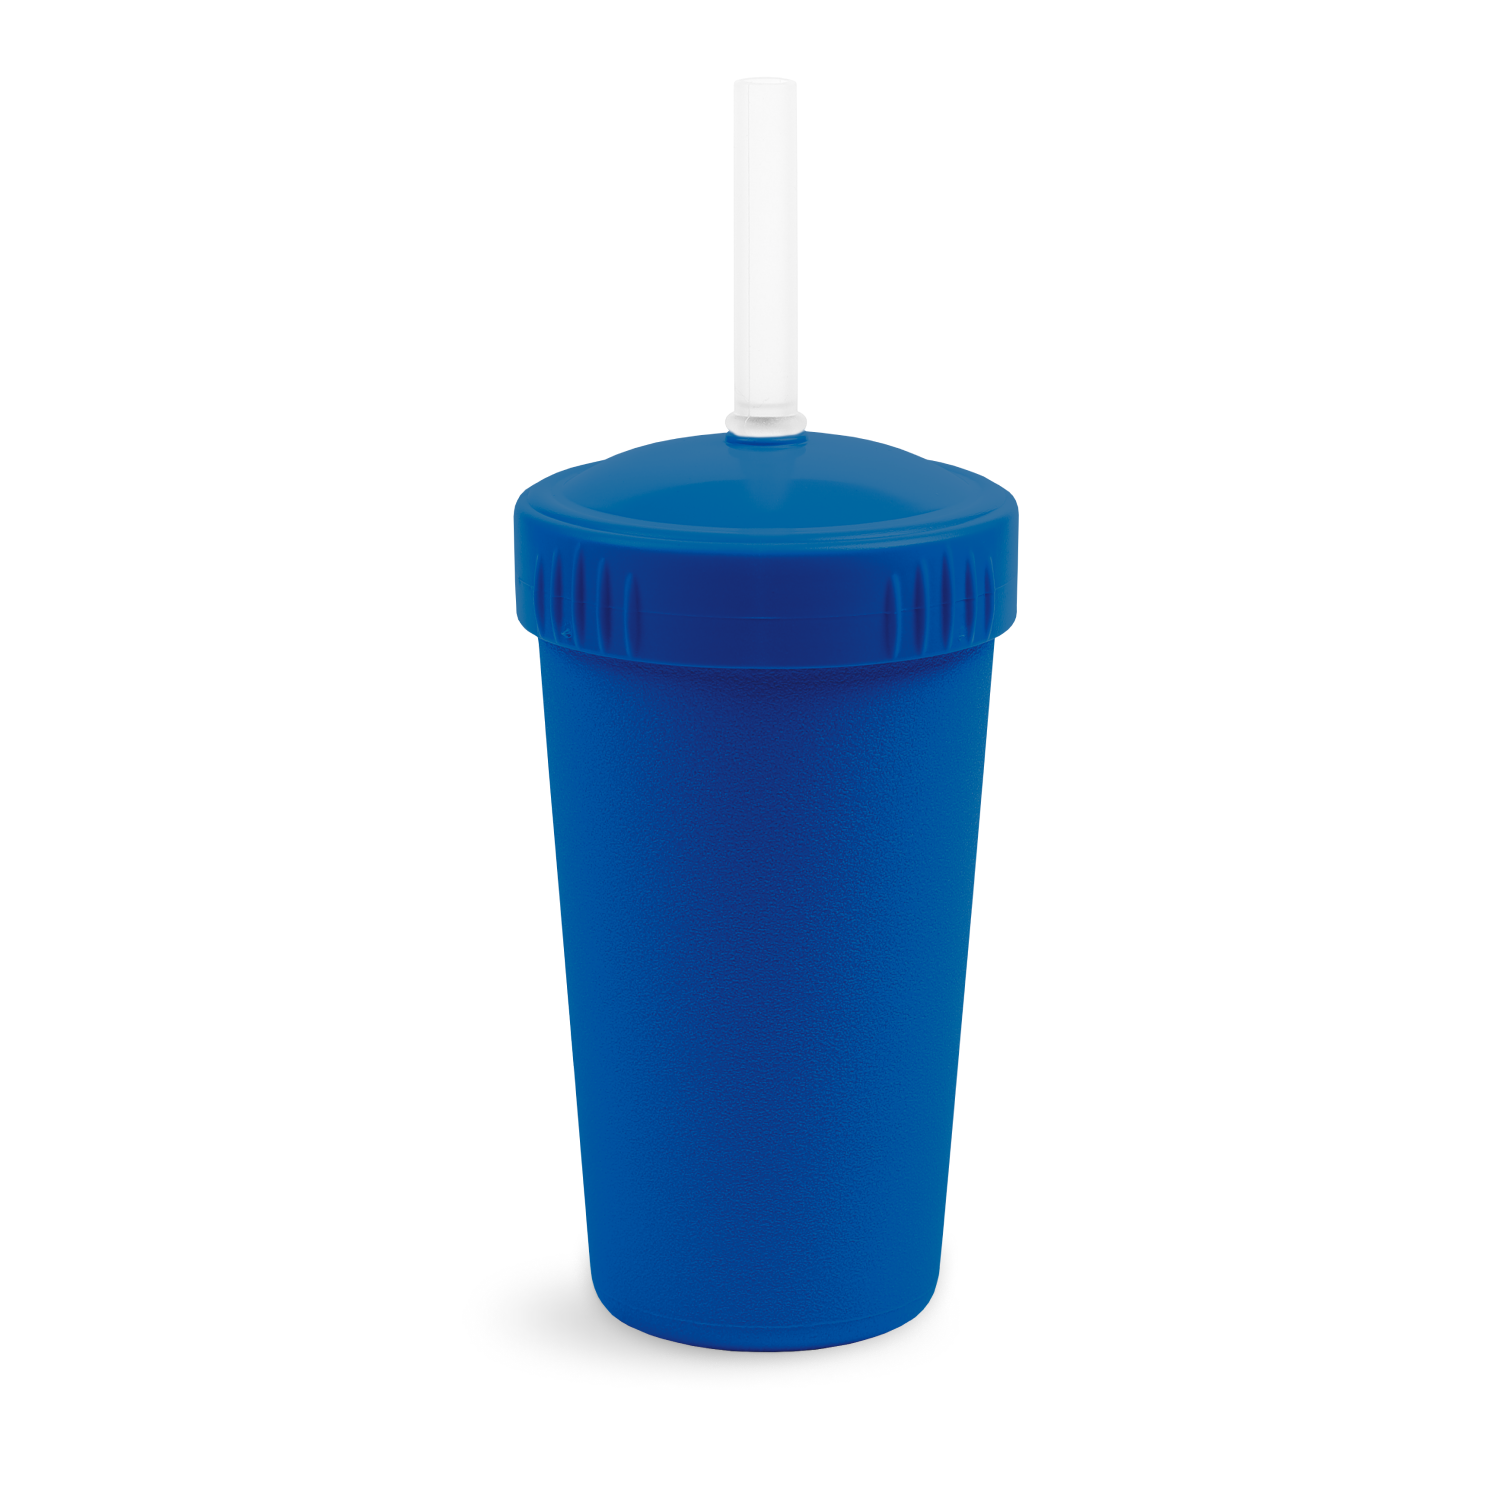 Small Milk Bottle Blue Lid Straw Cut Out Stock Photo by ©PixelRobot  603206532